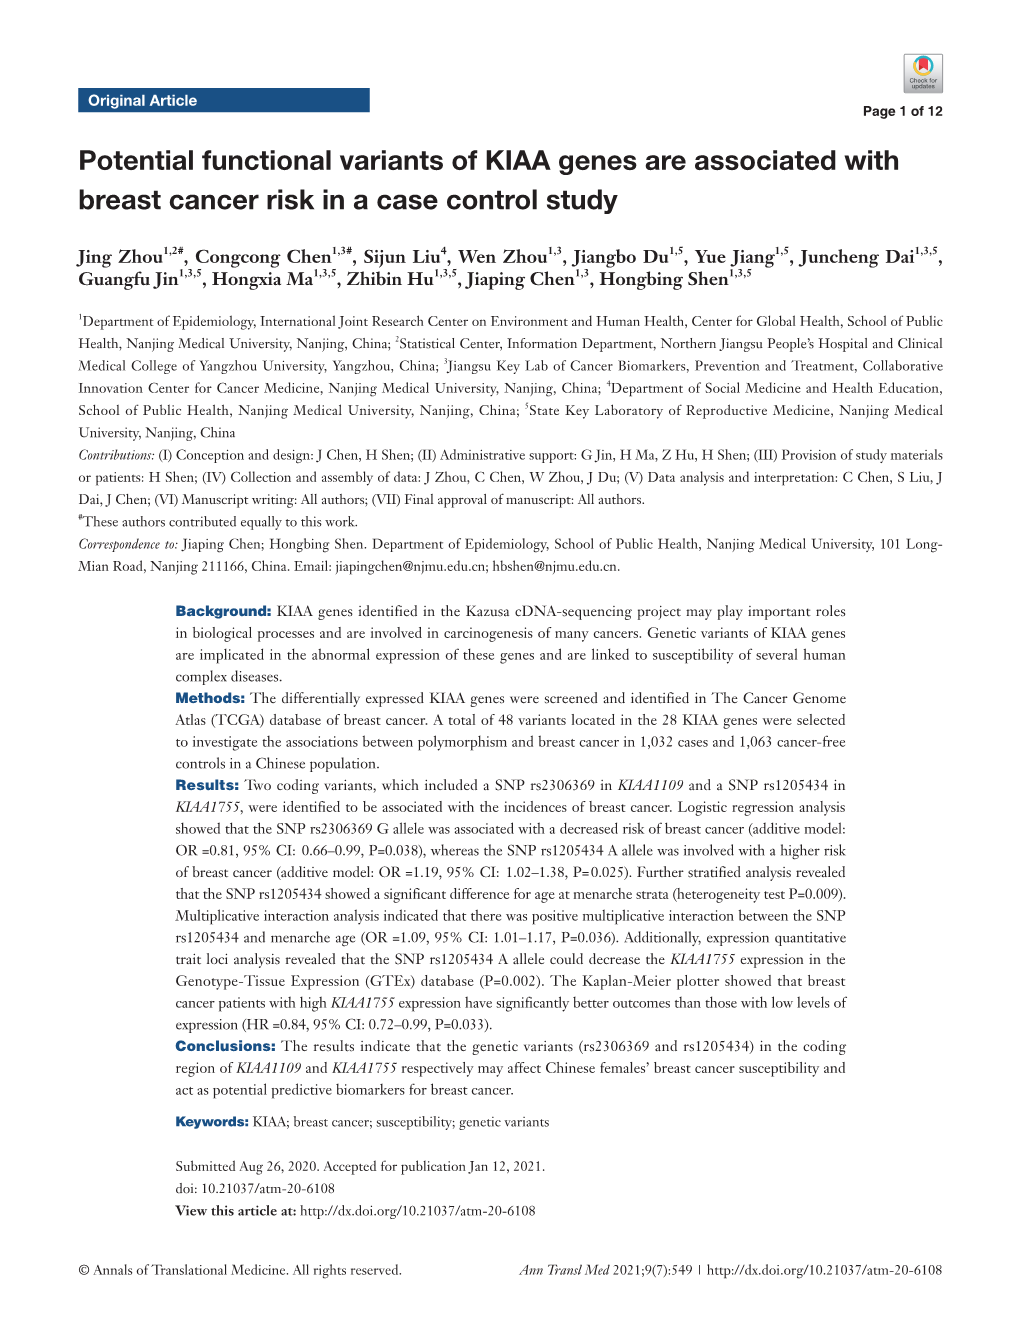 Potential Functional Variants of KIAA Genes Are Associated with Breast Cancer Risk in a Case Control Study